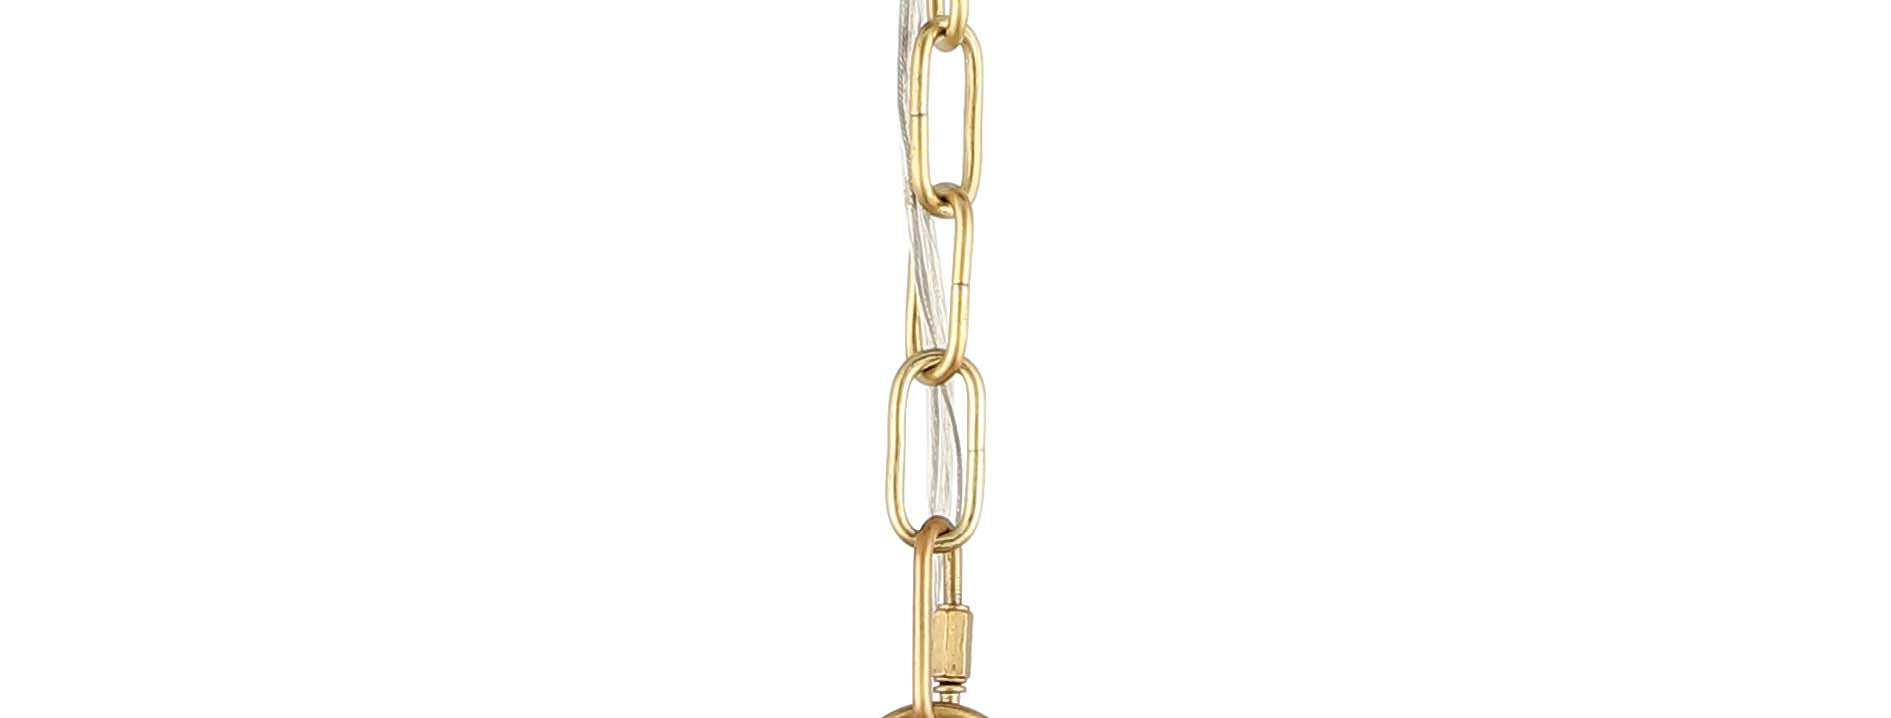 Safavieh Ryoa 12.25 Inch Extendable Pendant , PND4191 - Natural / Gold